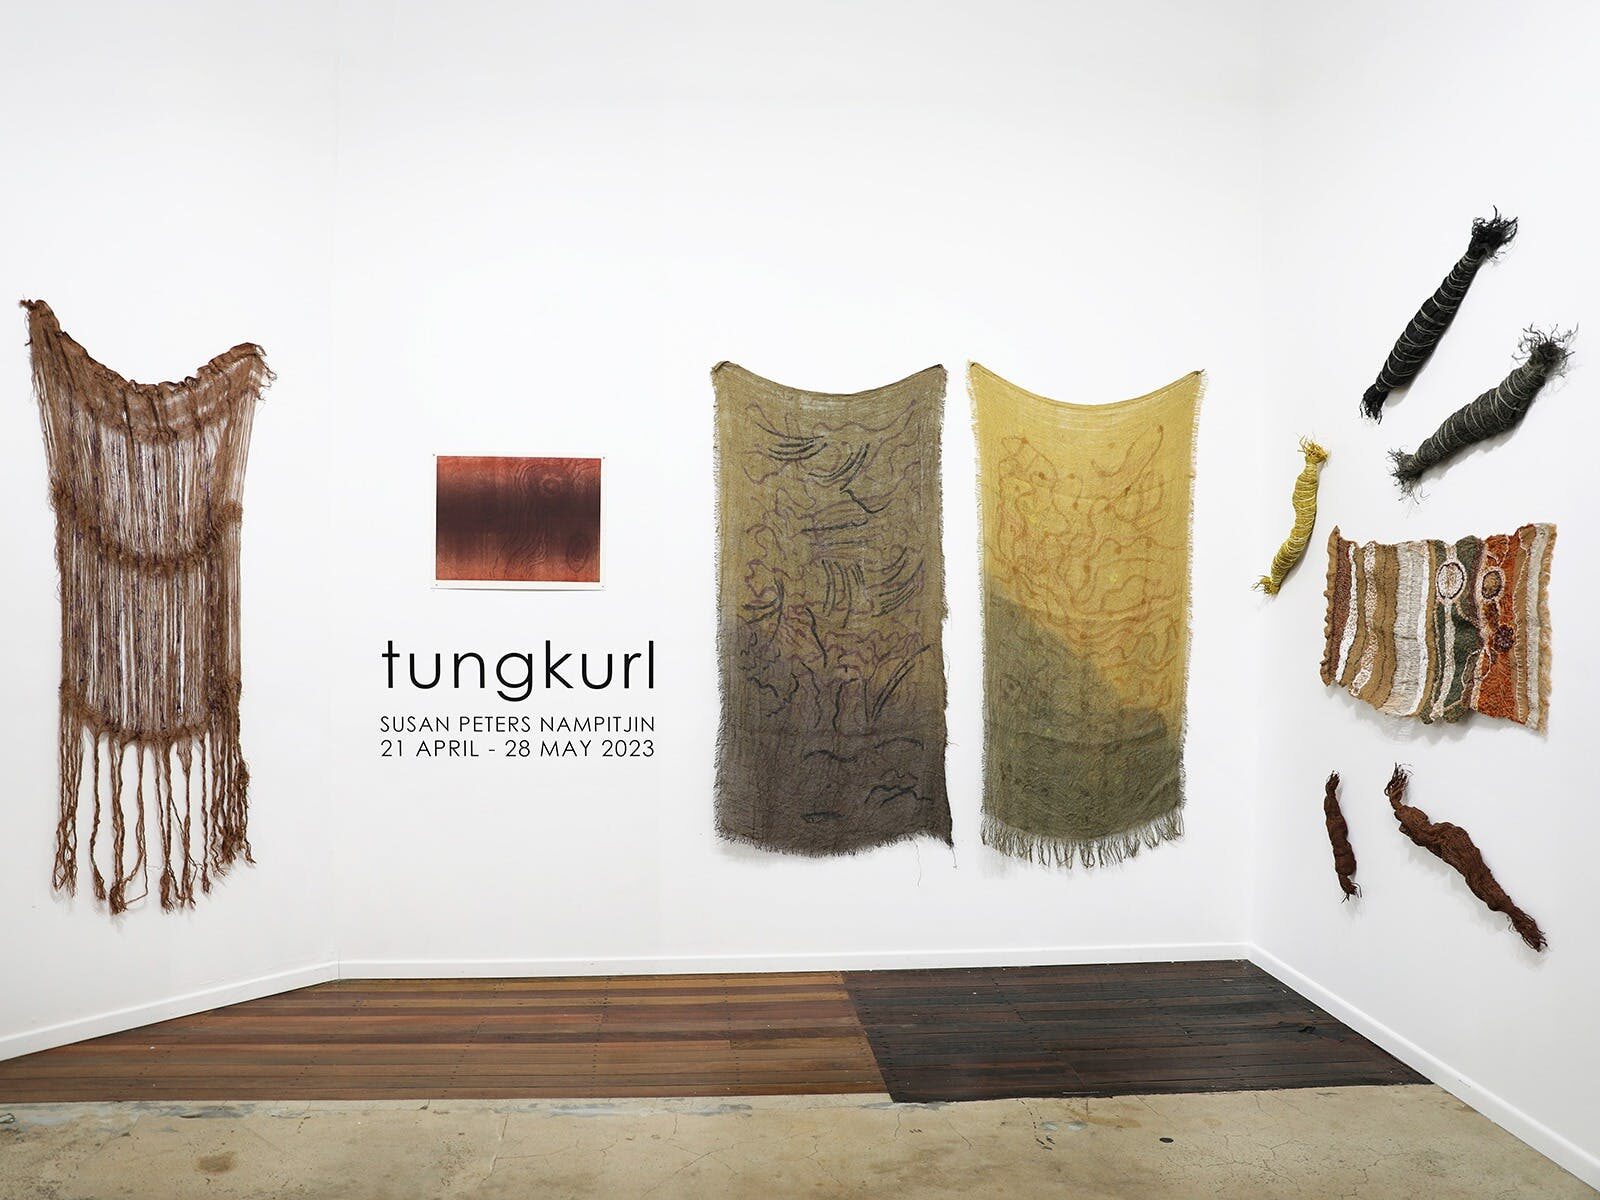 Detail from Susan Peters Nampitjin's exhibition 'Tungkurl,' with prints and works on hessian.